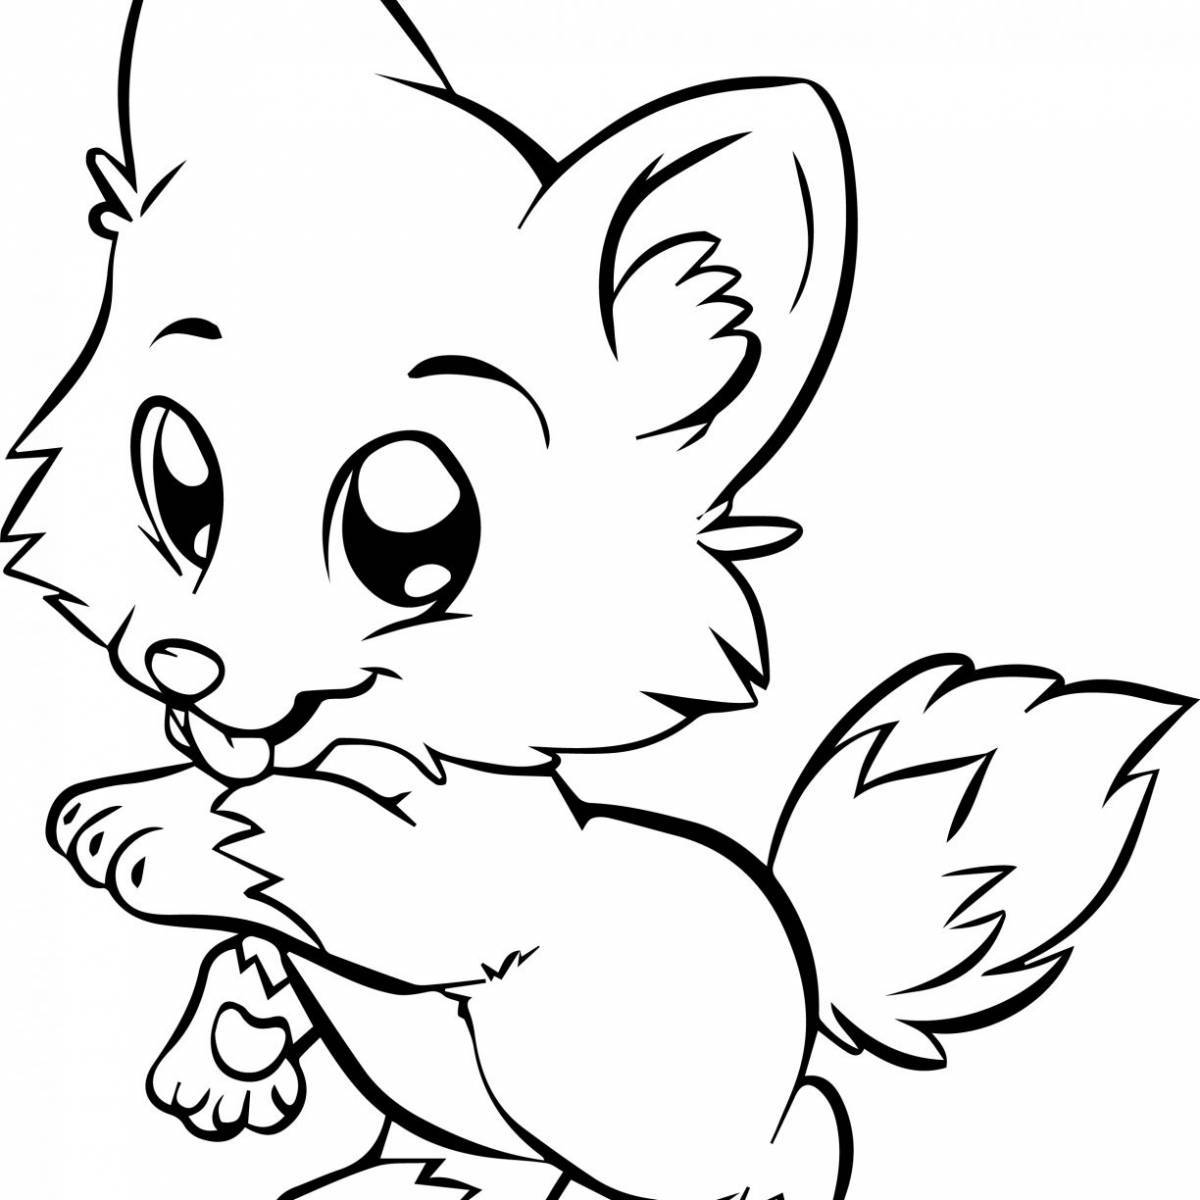 Showy animal coloring pages